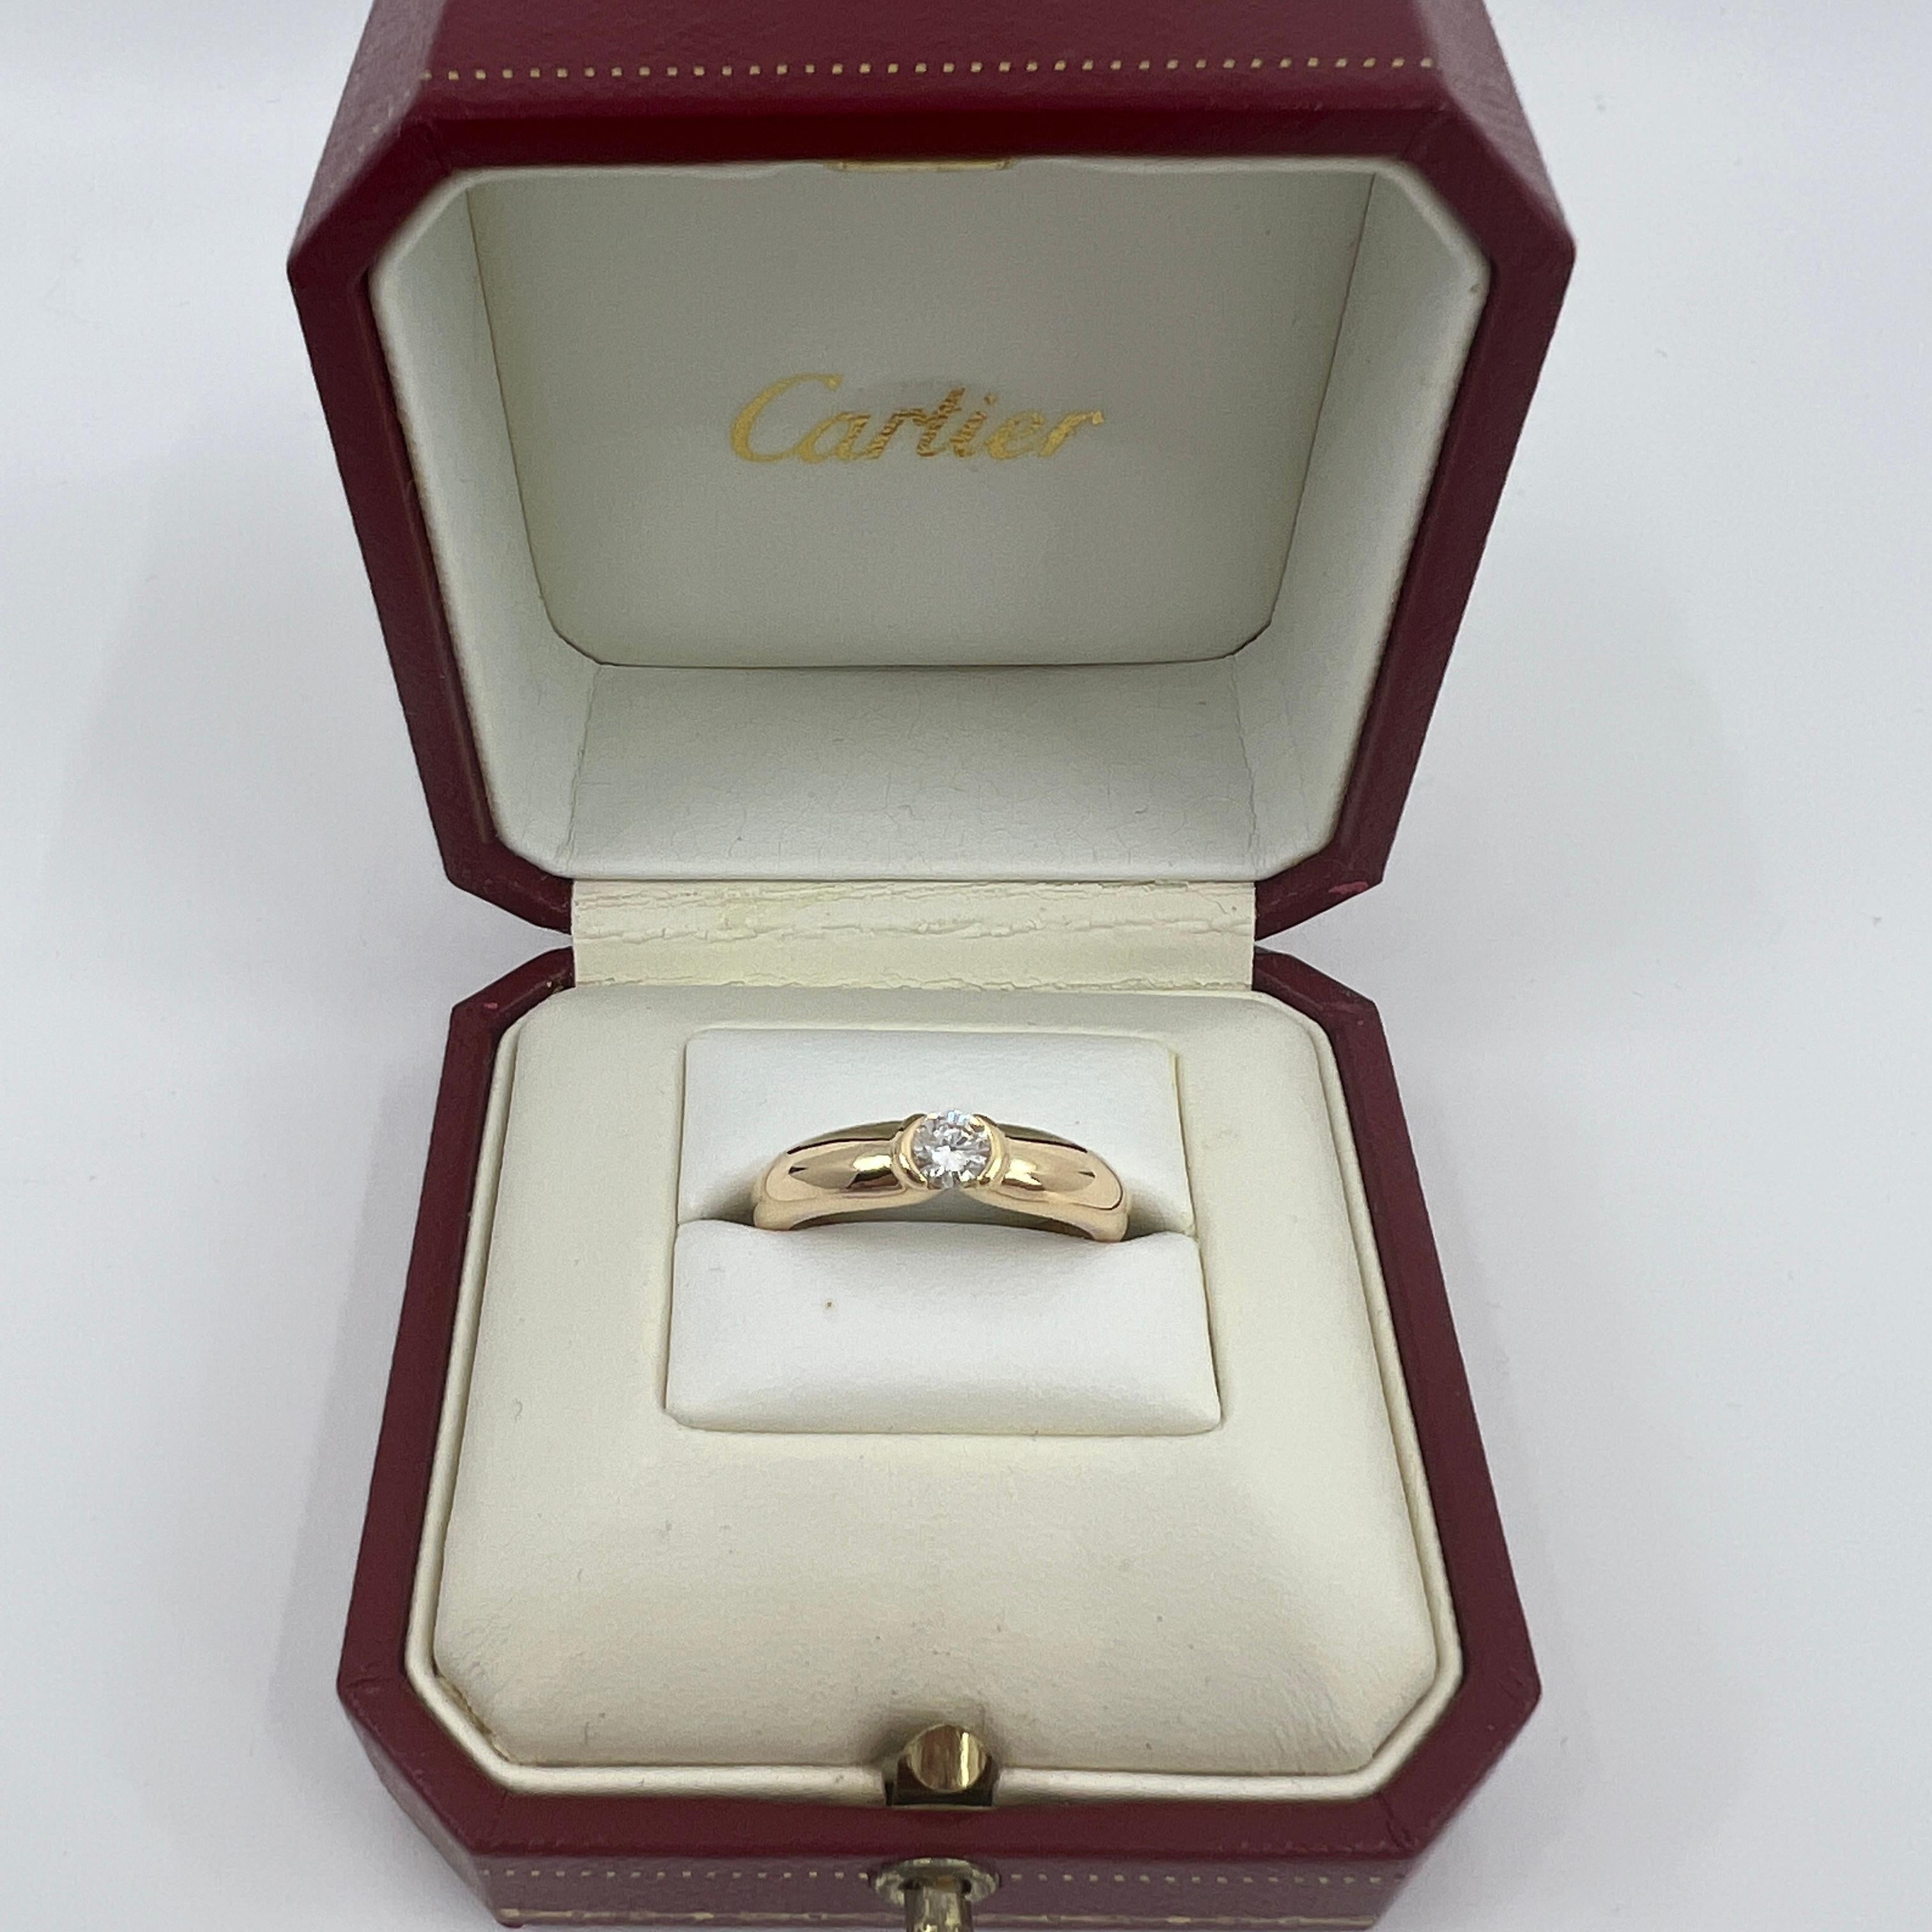 Vintage Cartier Round Brilliant Diamond 18k Yellow Gold Solitaire Ring.

Stunning yellow gold ring set with a fine 0.30ct round diamond. E colour VVS1 clarity with an excellent round brilliant cut. Fine jewellery houses like Cartier only use the